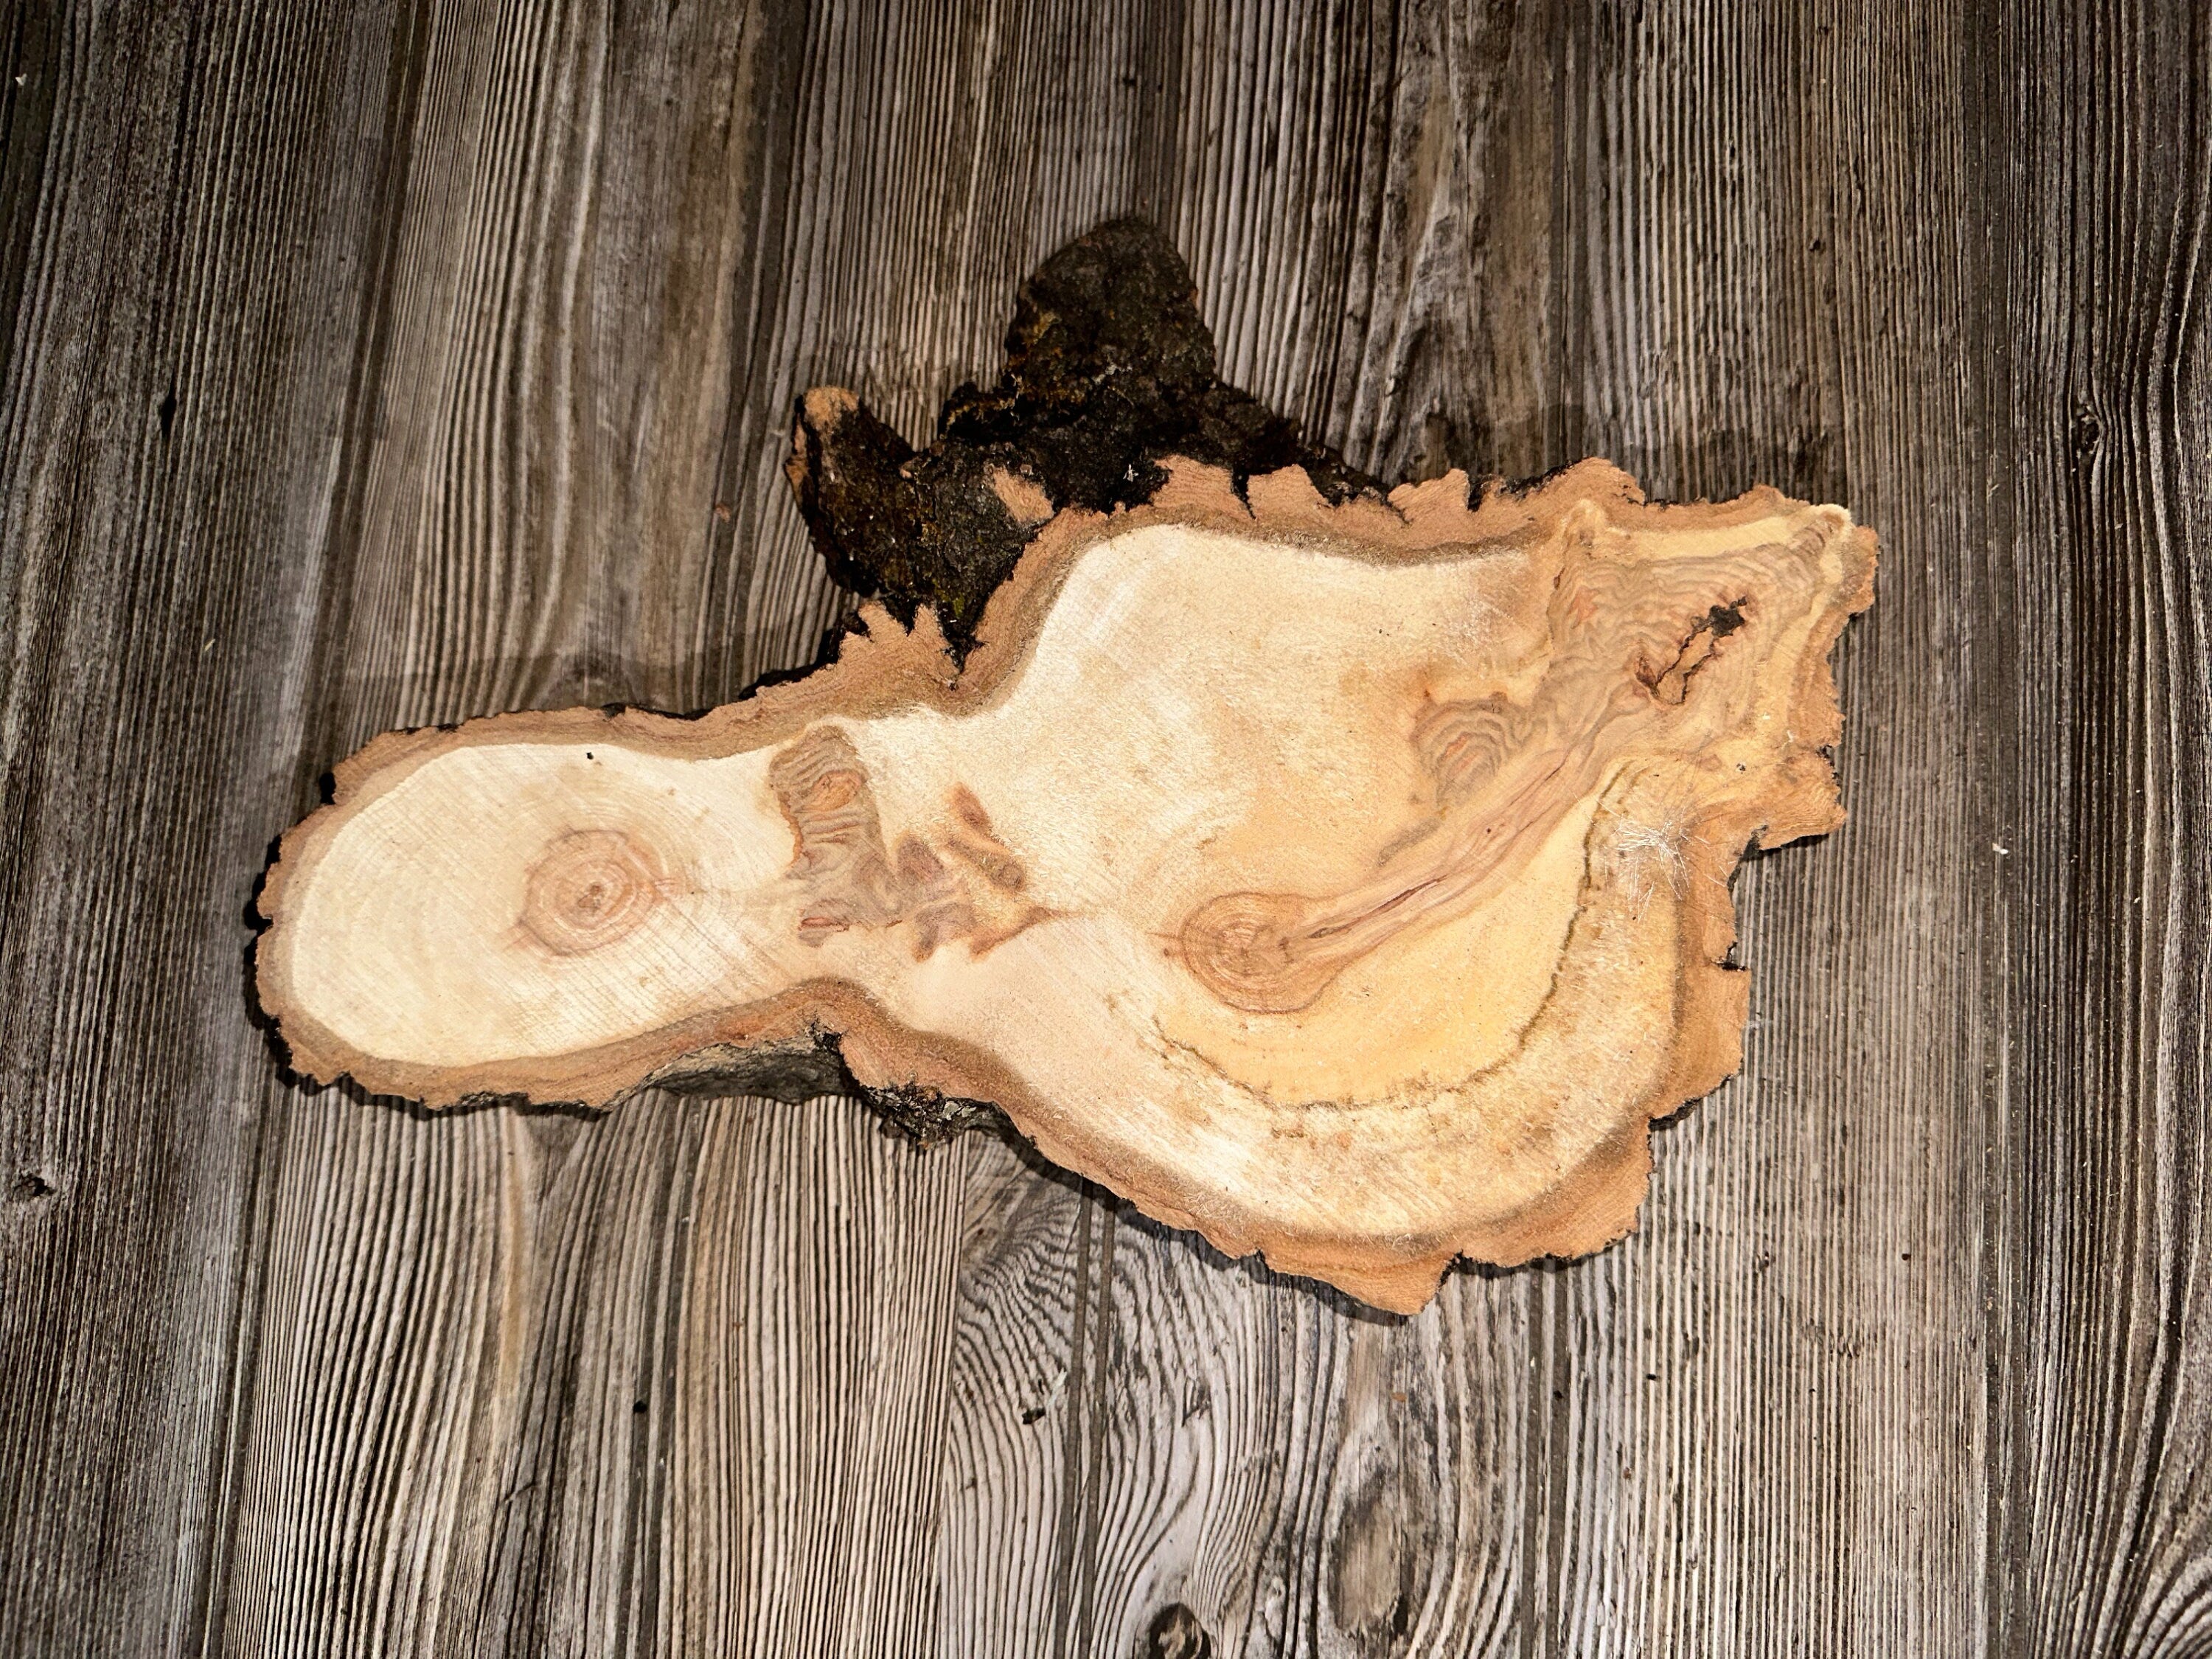 Unique Aspen Burl Slice, Approximately 14 Inches Long by 10 Inches Wide and 2 Inches Thick